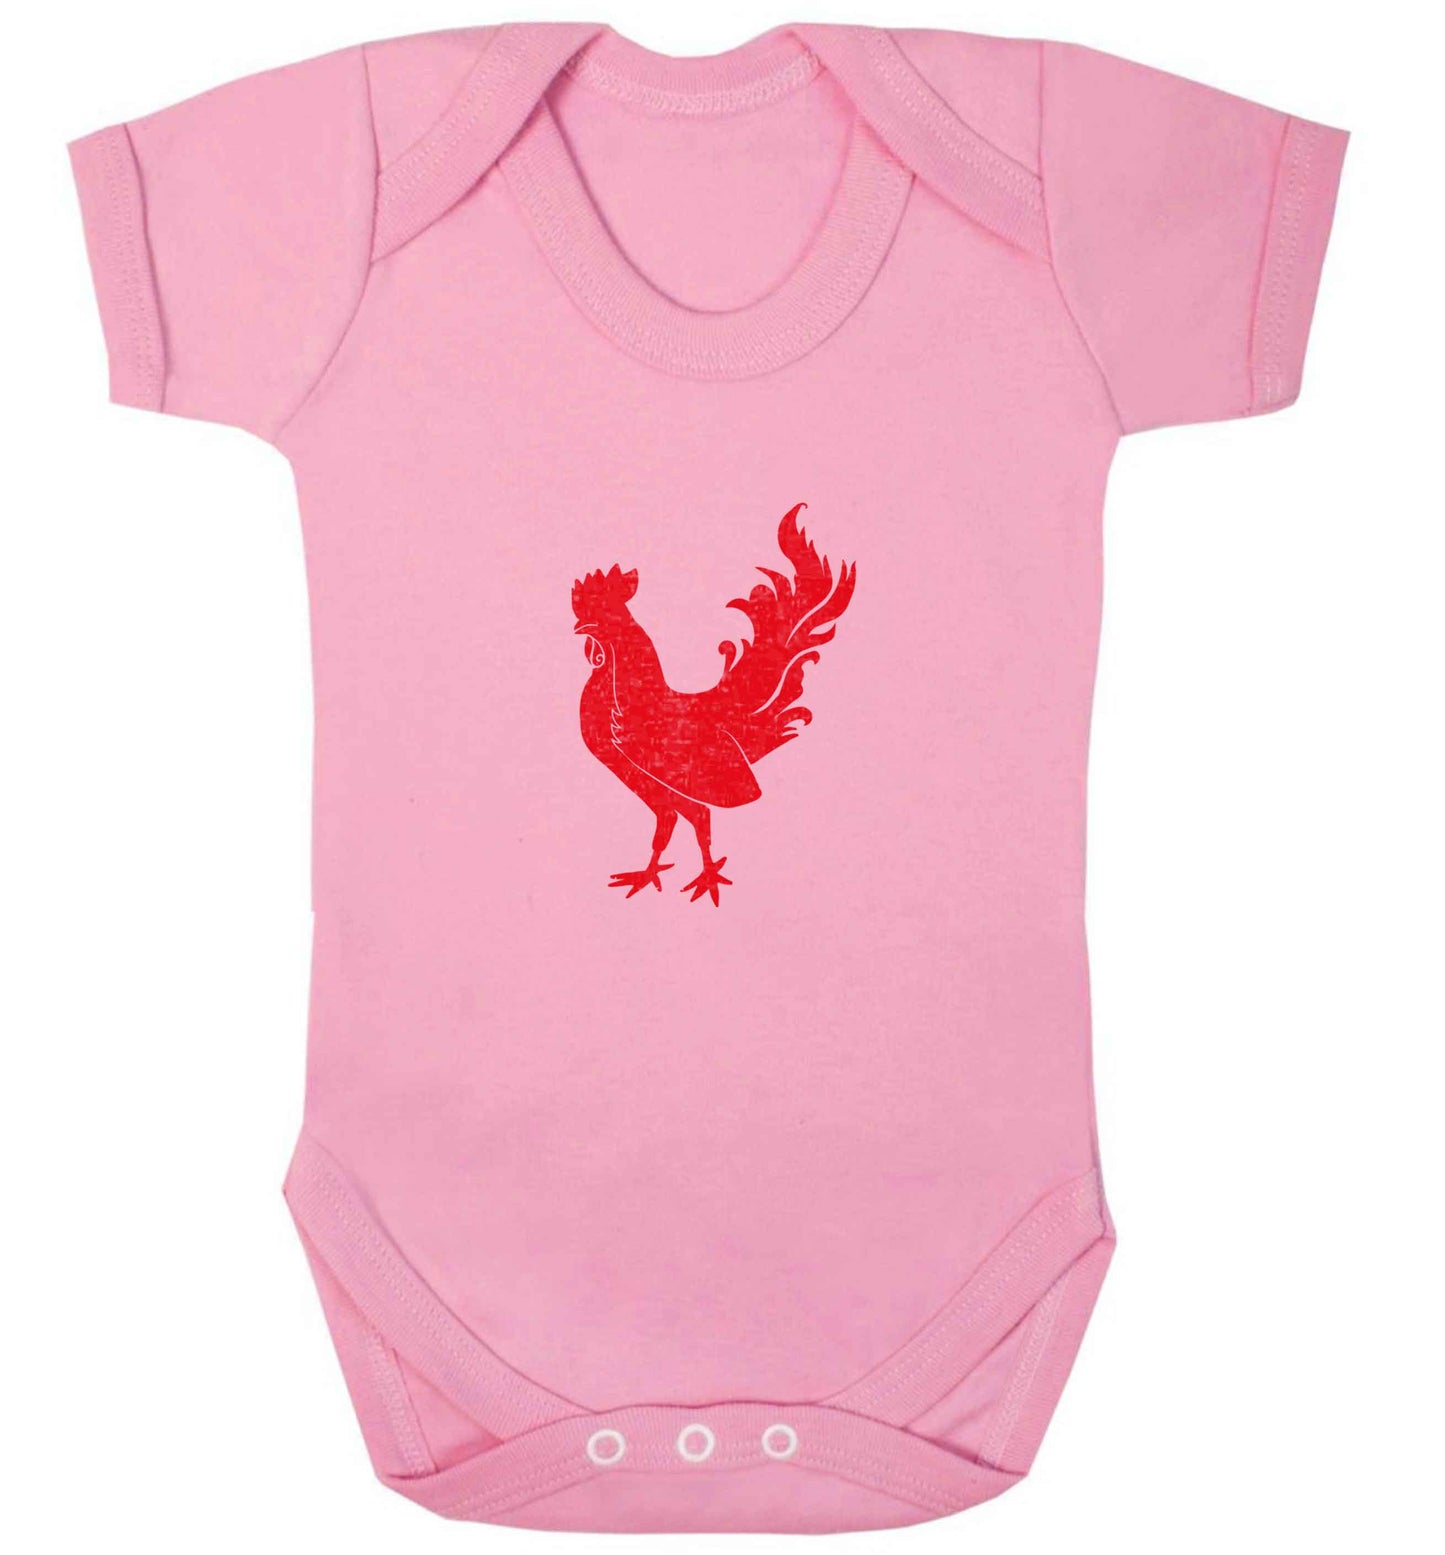 Rooster baby vest pale pink 18-24 months